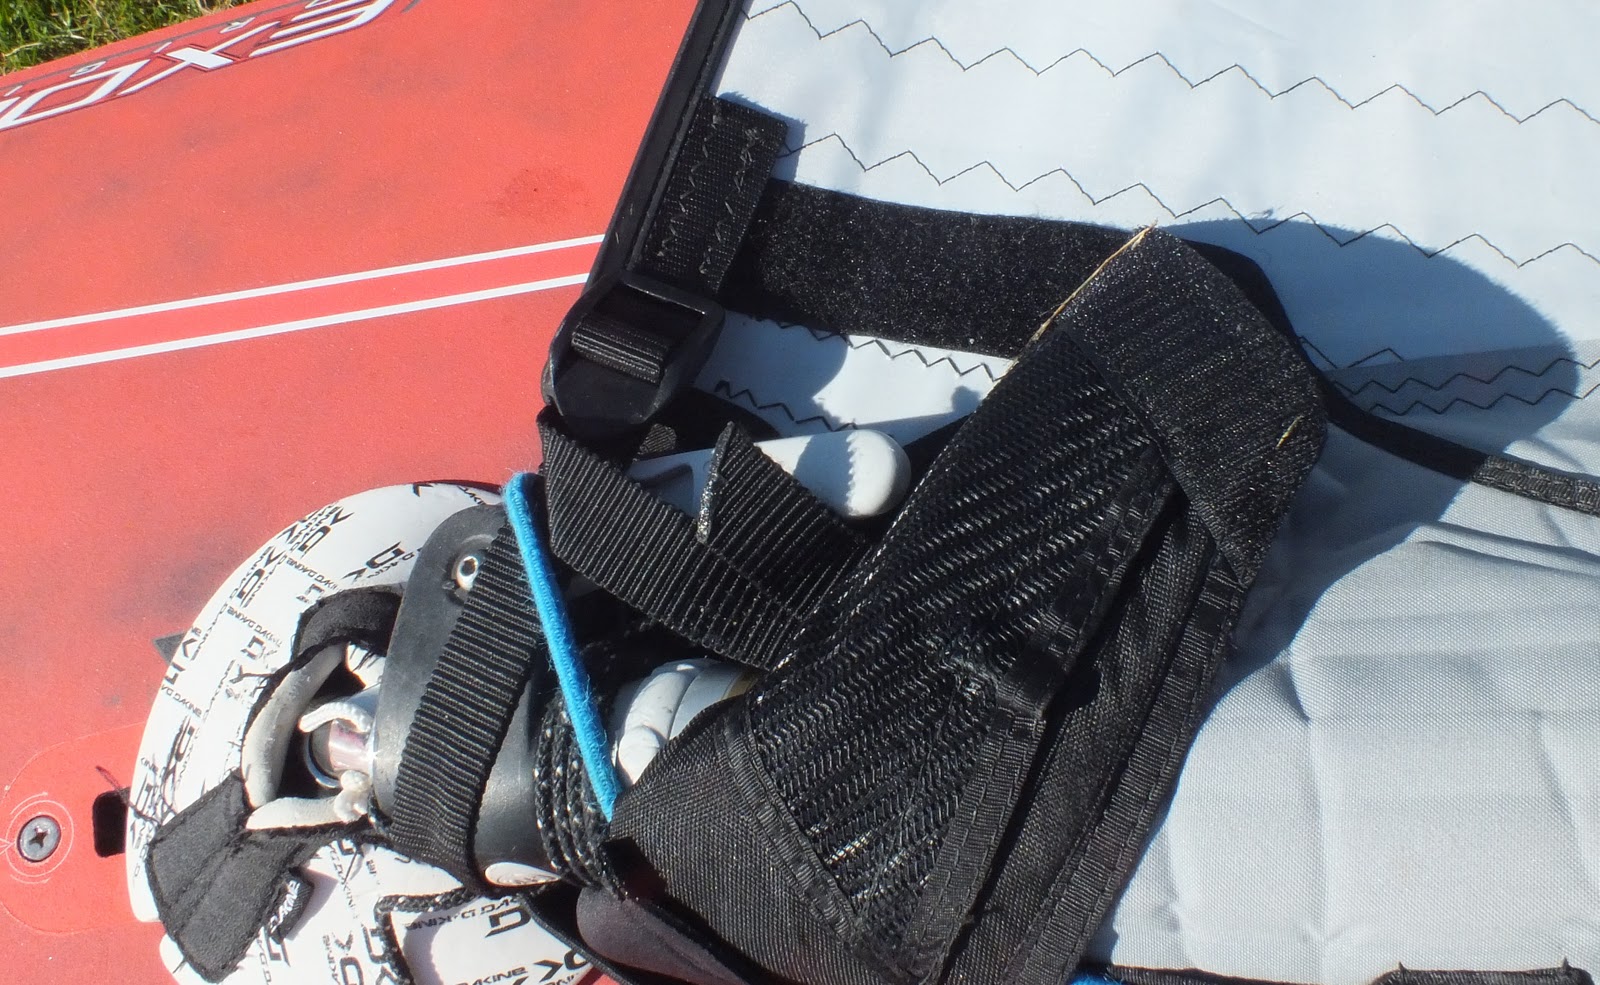 SpeedSurfing News: Exocet 'FreeRace' Tests - First Impressions When Rigging